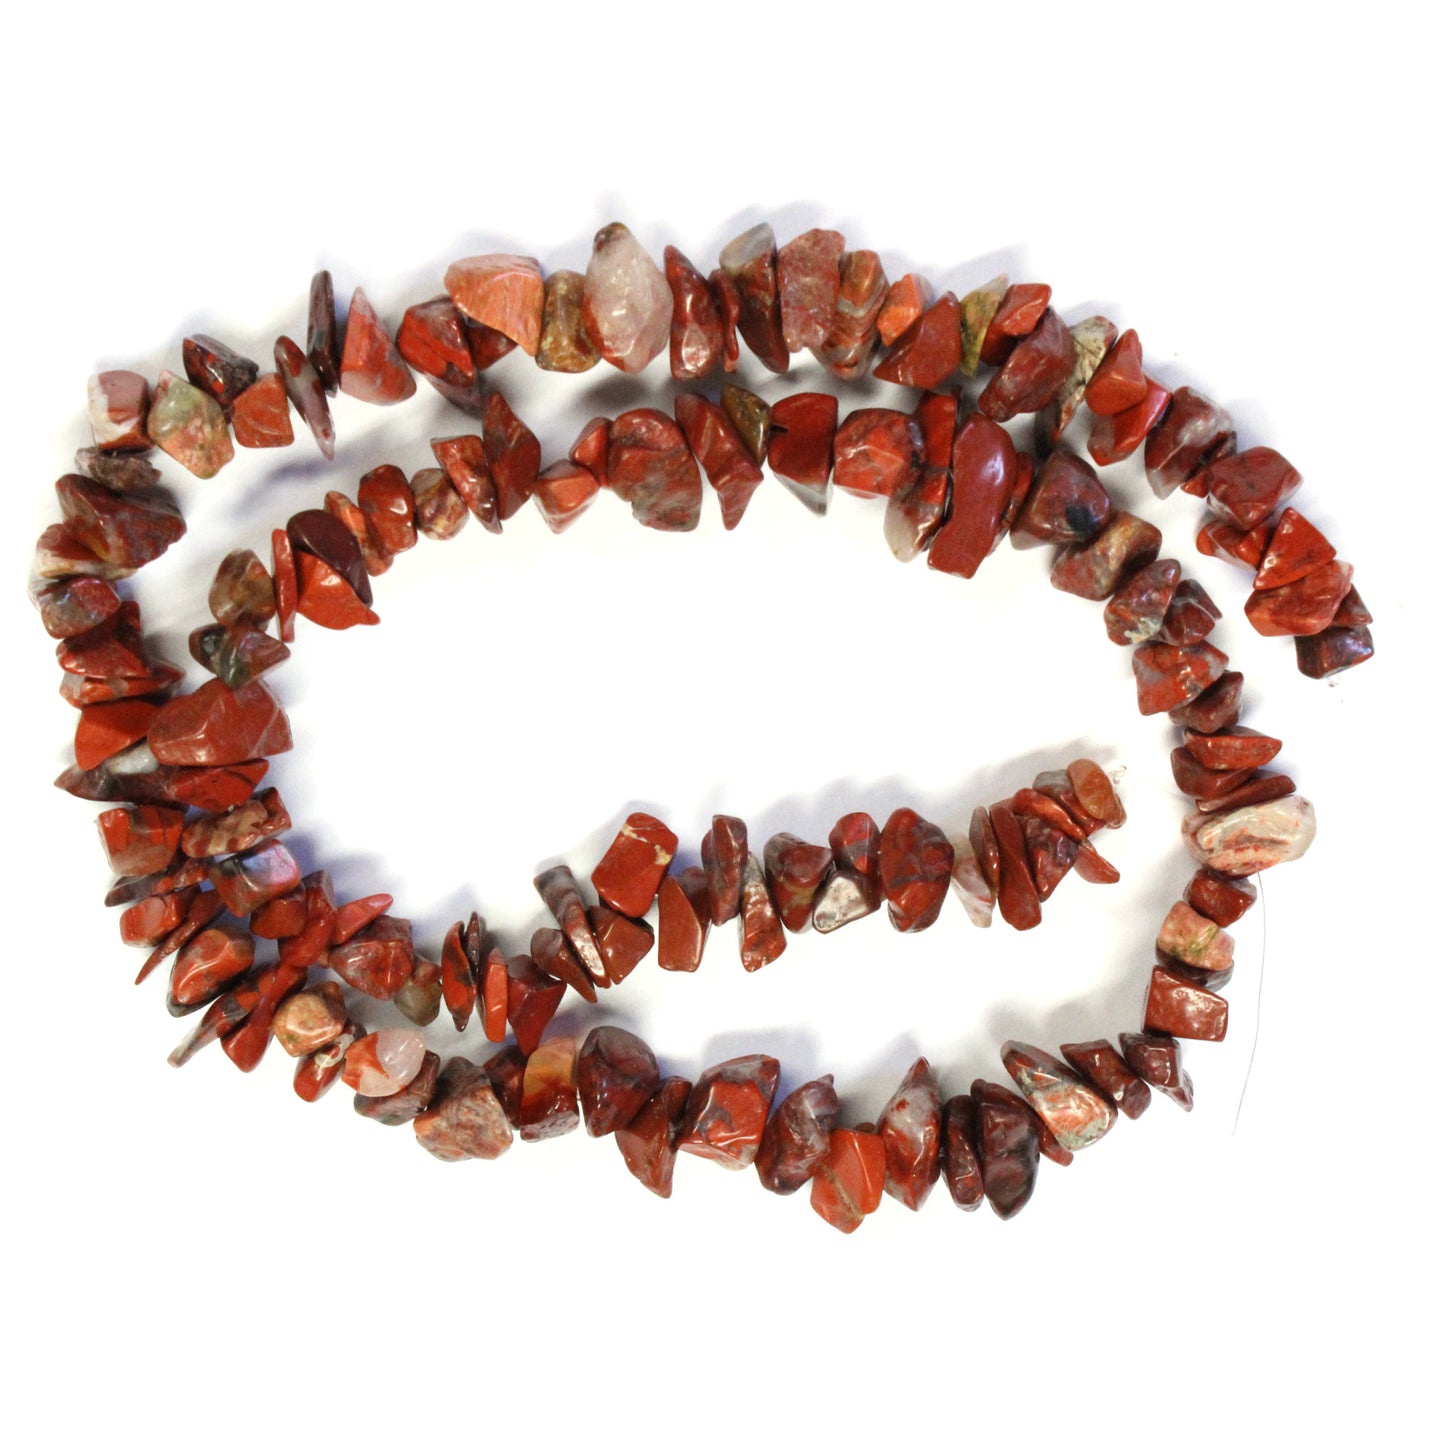 Poppy Jasper Chip Beads / 16 Inch strand / 6-12 chips / natural opaque stone